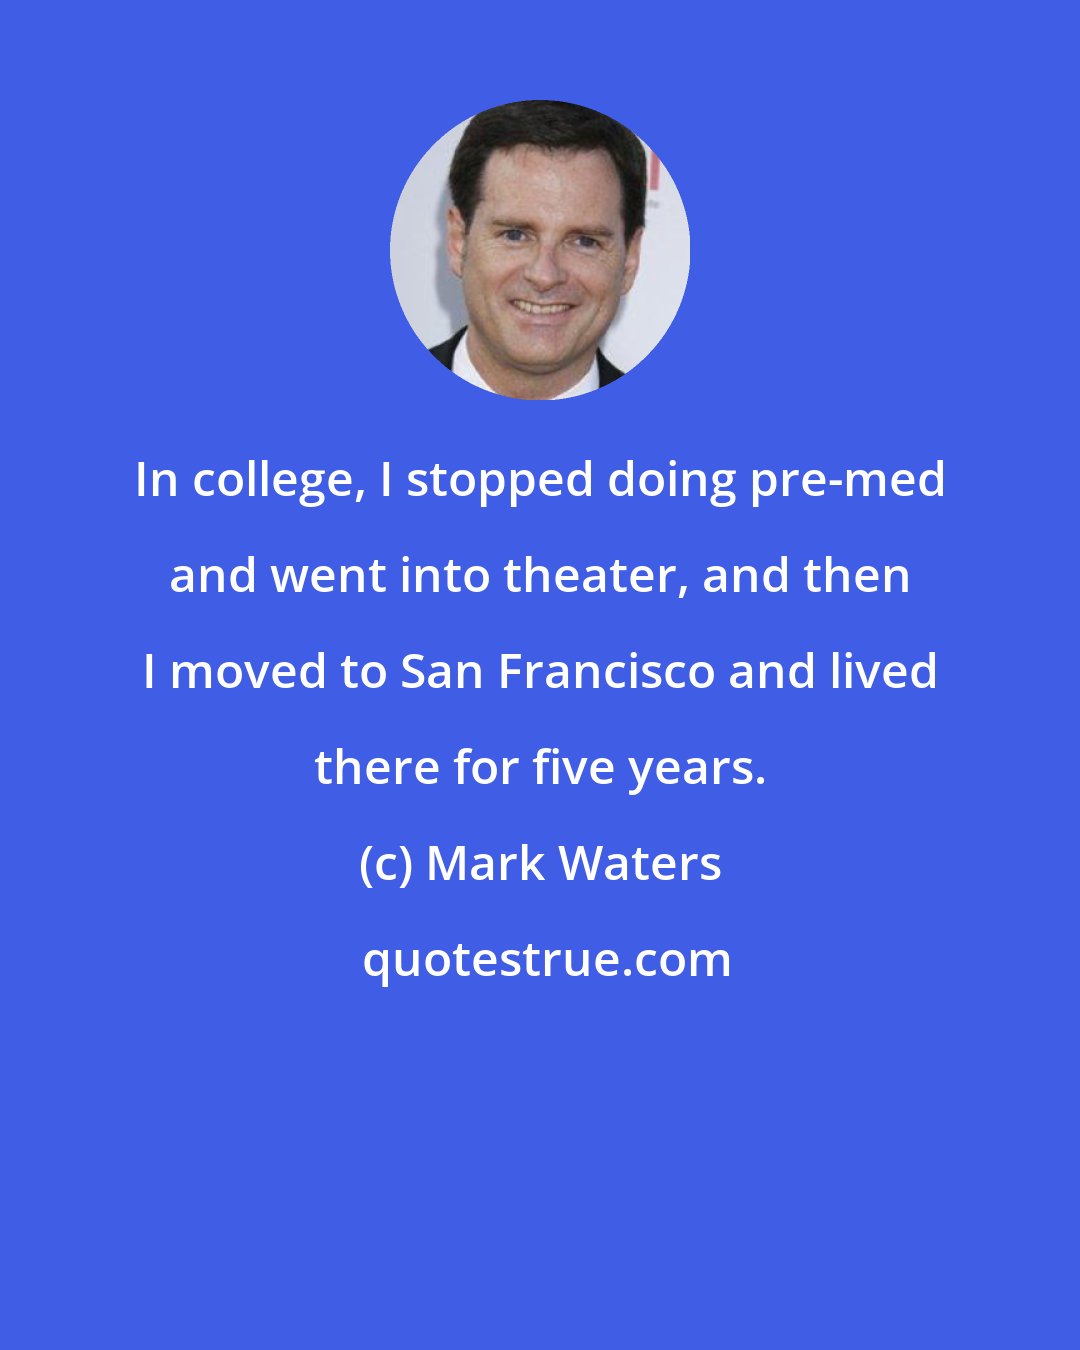 Mark Waters: In college, I stopped doing pre-med and went into theater, and then I moved to San Francisco and lived there for five years.